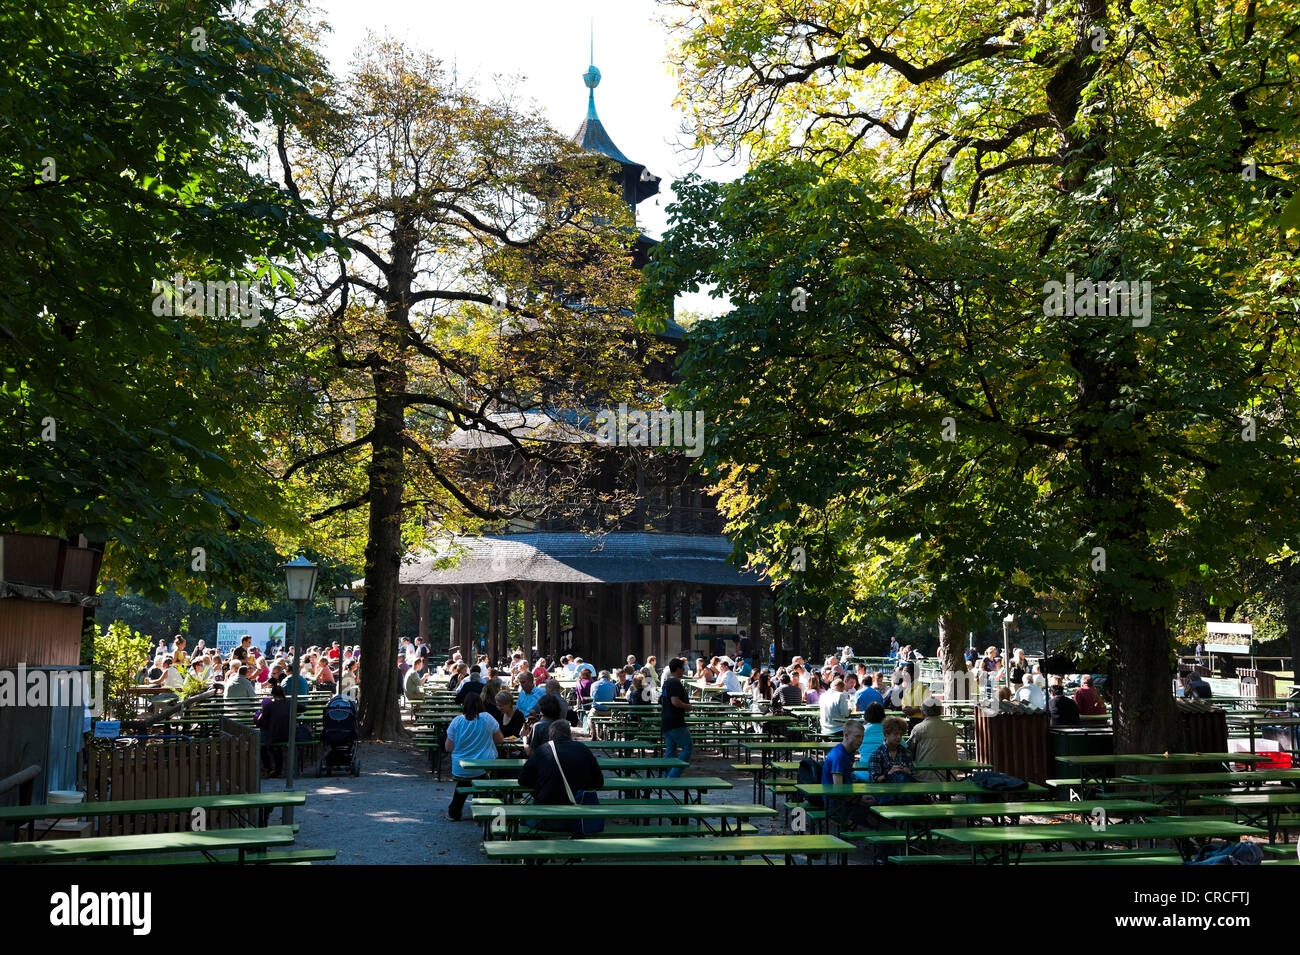 People sitting in the beer garden near the Chinese Tower in the English Garden, Munich, Bavaria, German, Europe Stock Photo